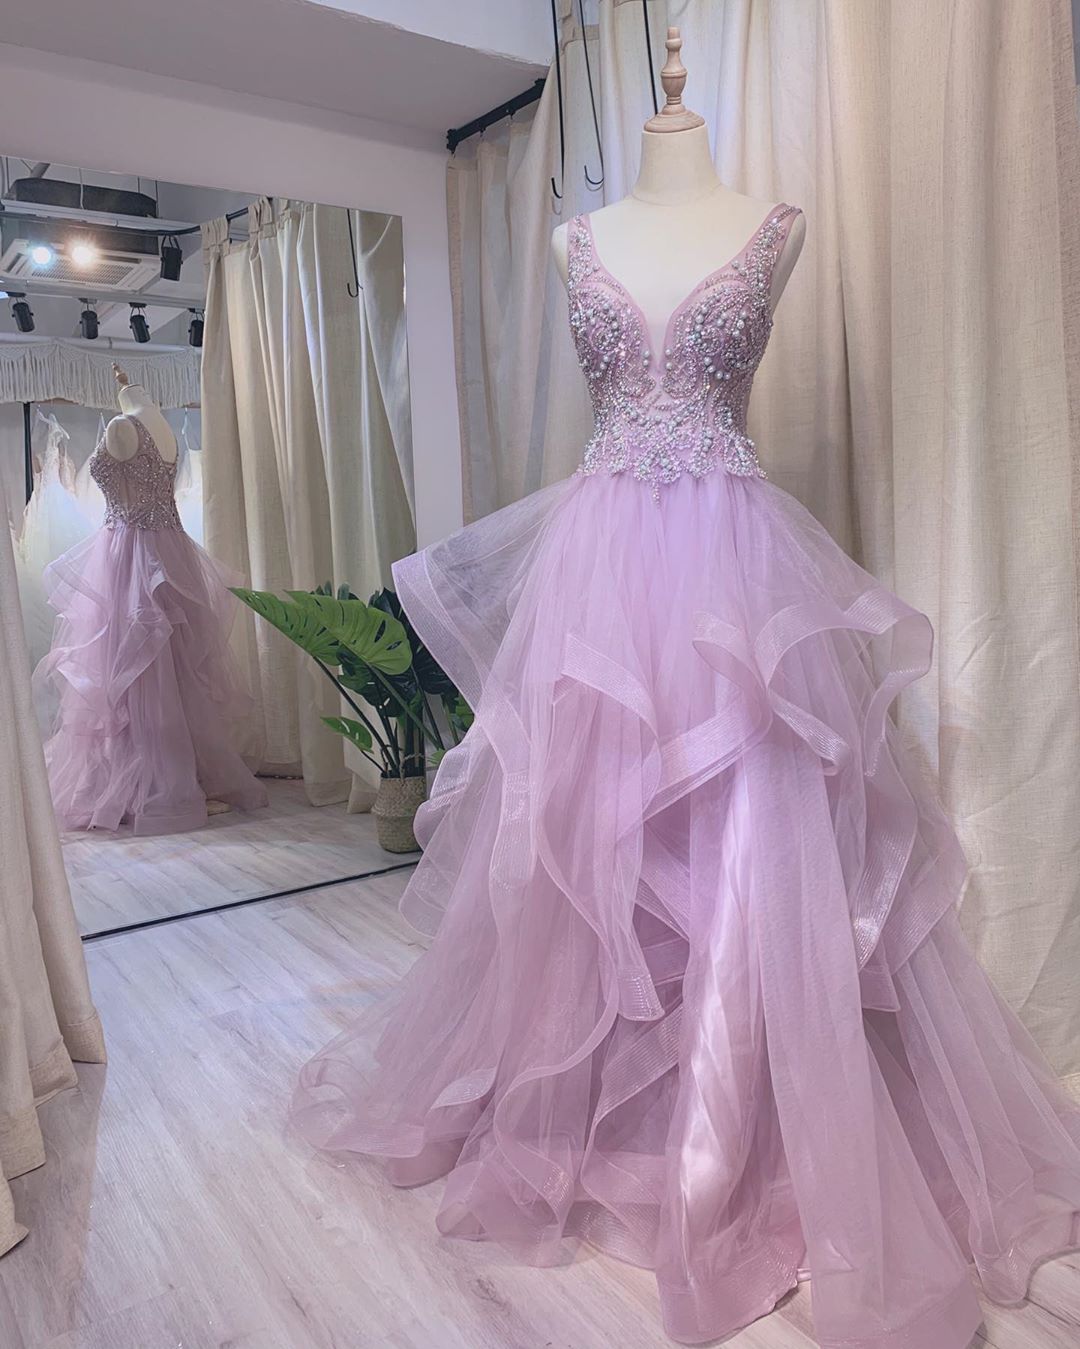 Real Made Ball Gown Prom Dresses, Long Prom Dress, Prom Dress,pl2642